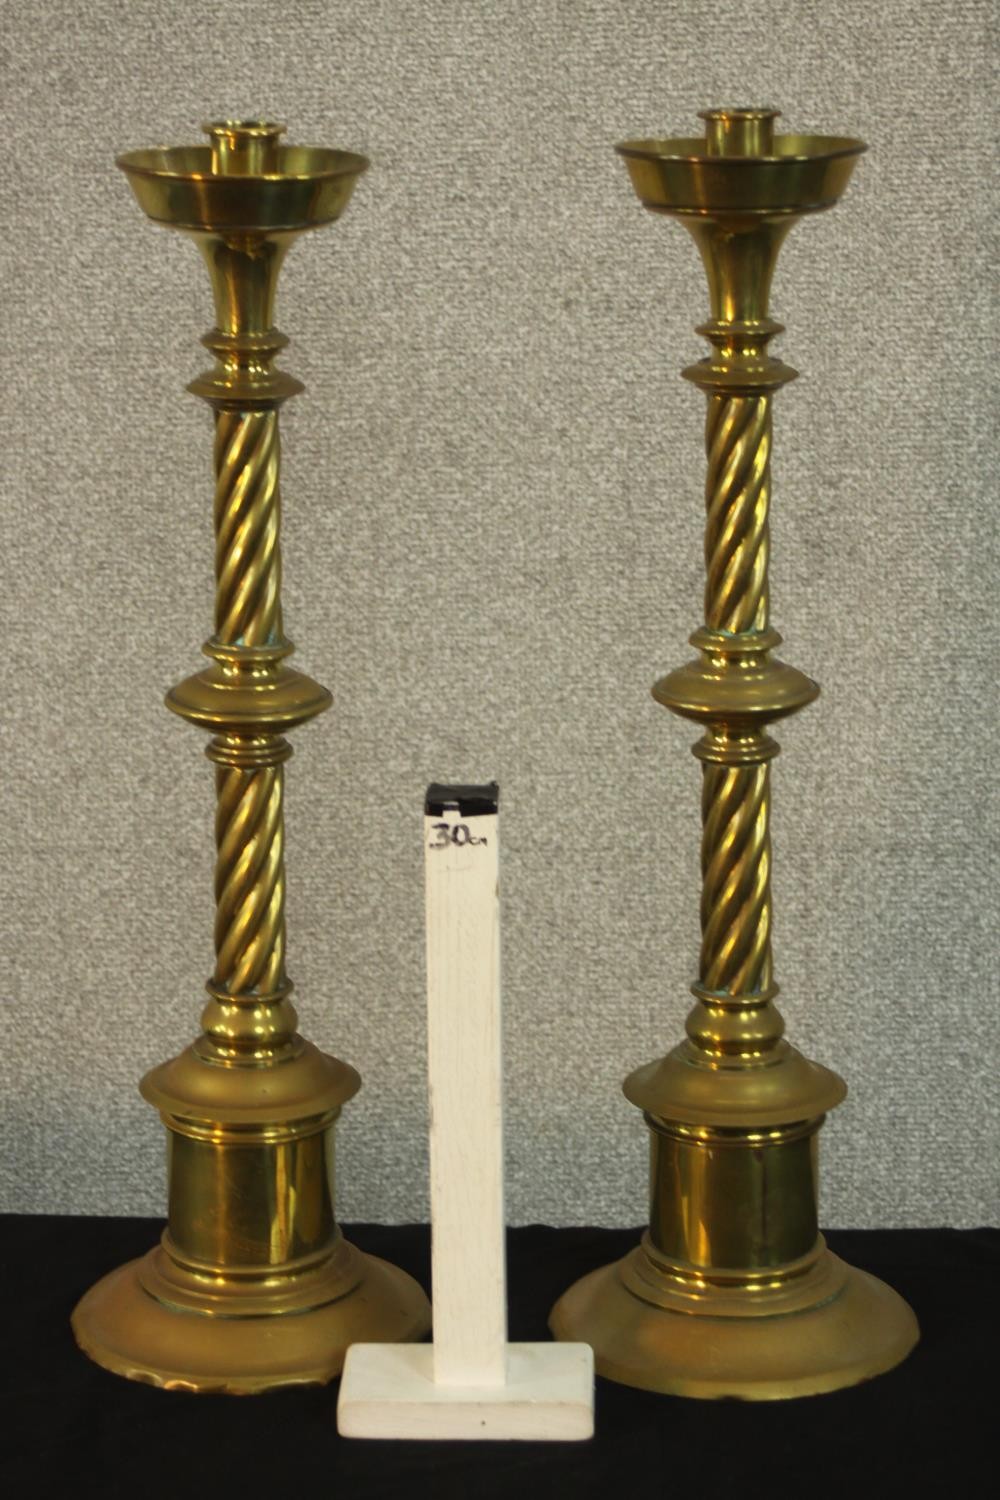 A pair of large early 20th century brass ecclesiastical twist stem floor standing candle holders - Image 2 of 5